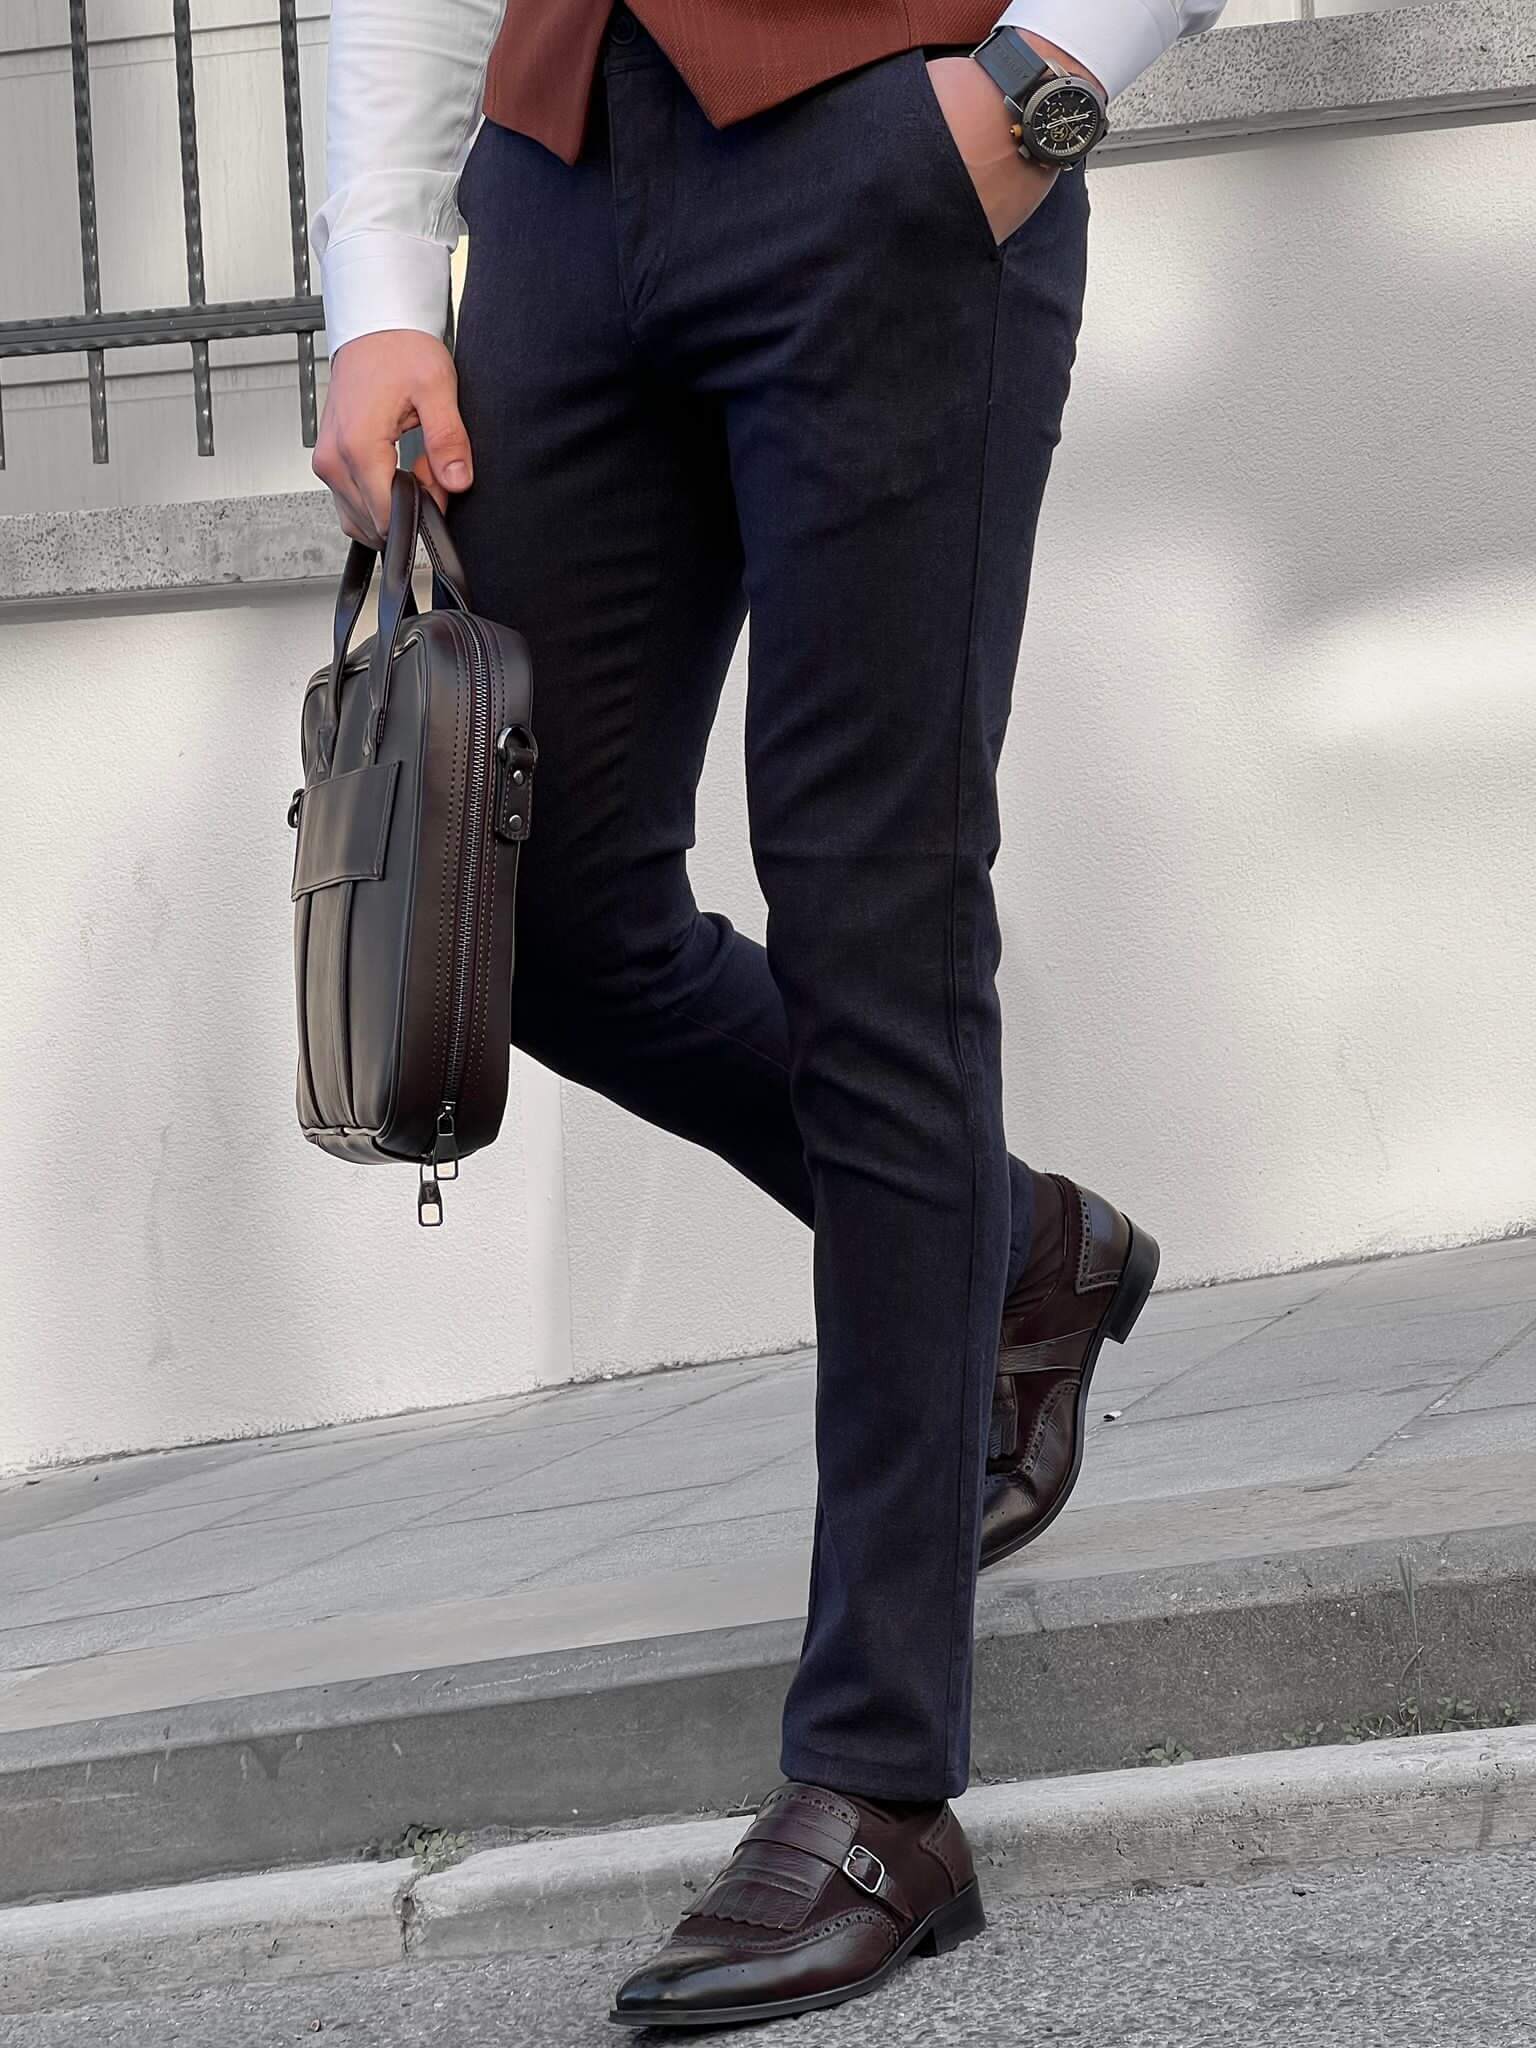 Self-patterned navy blue pants for modern lifestyle